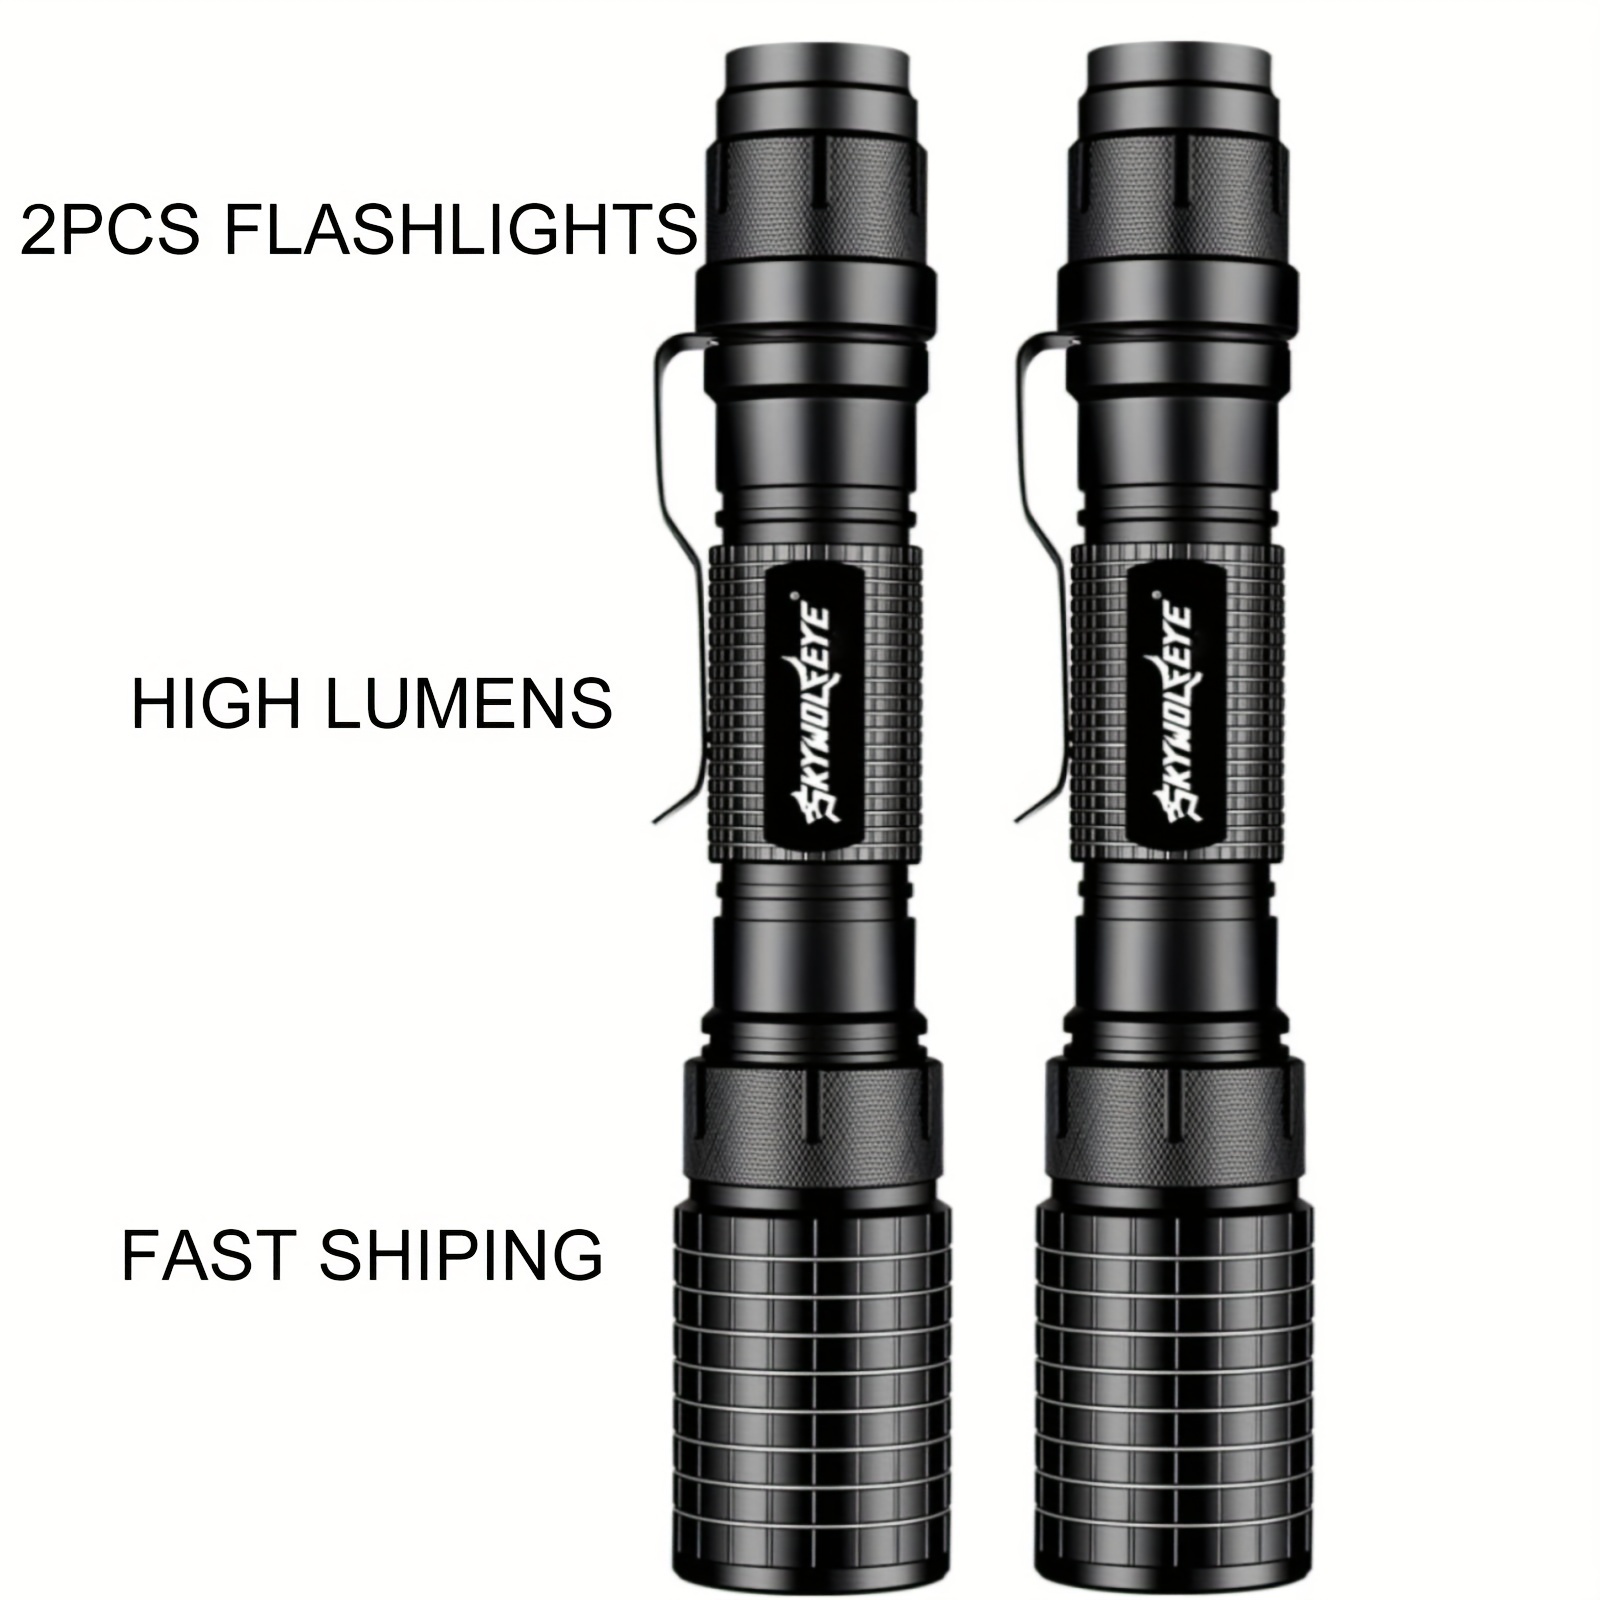 

2xled Flashlight Super Bright High Lumen 5 Modes Zoomable Torch Lamp Powerful Tactical Torch For Emergency/camping/field Exploration/mountaineering